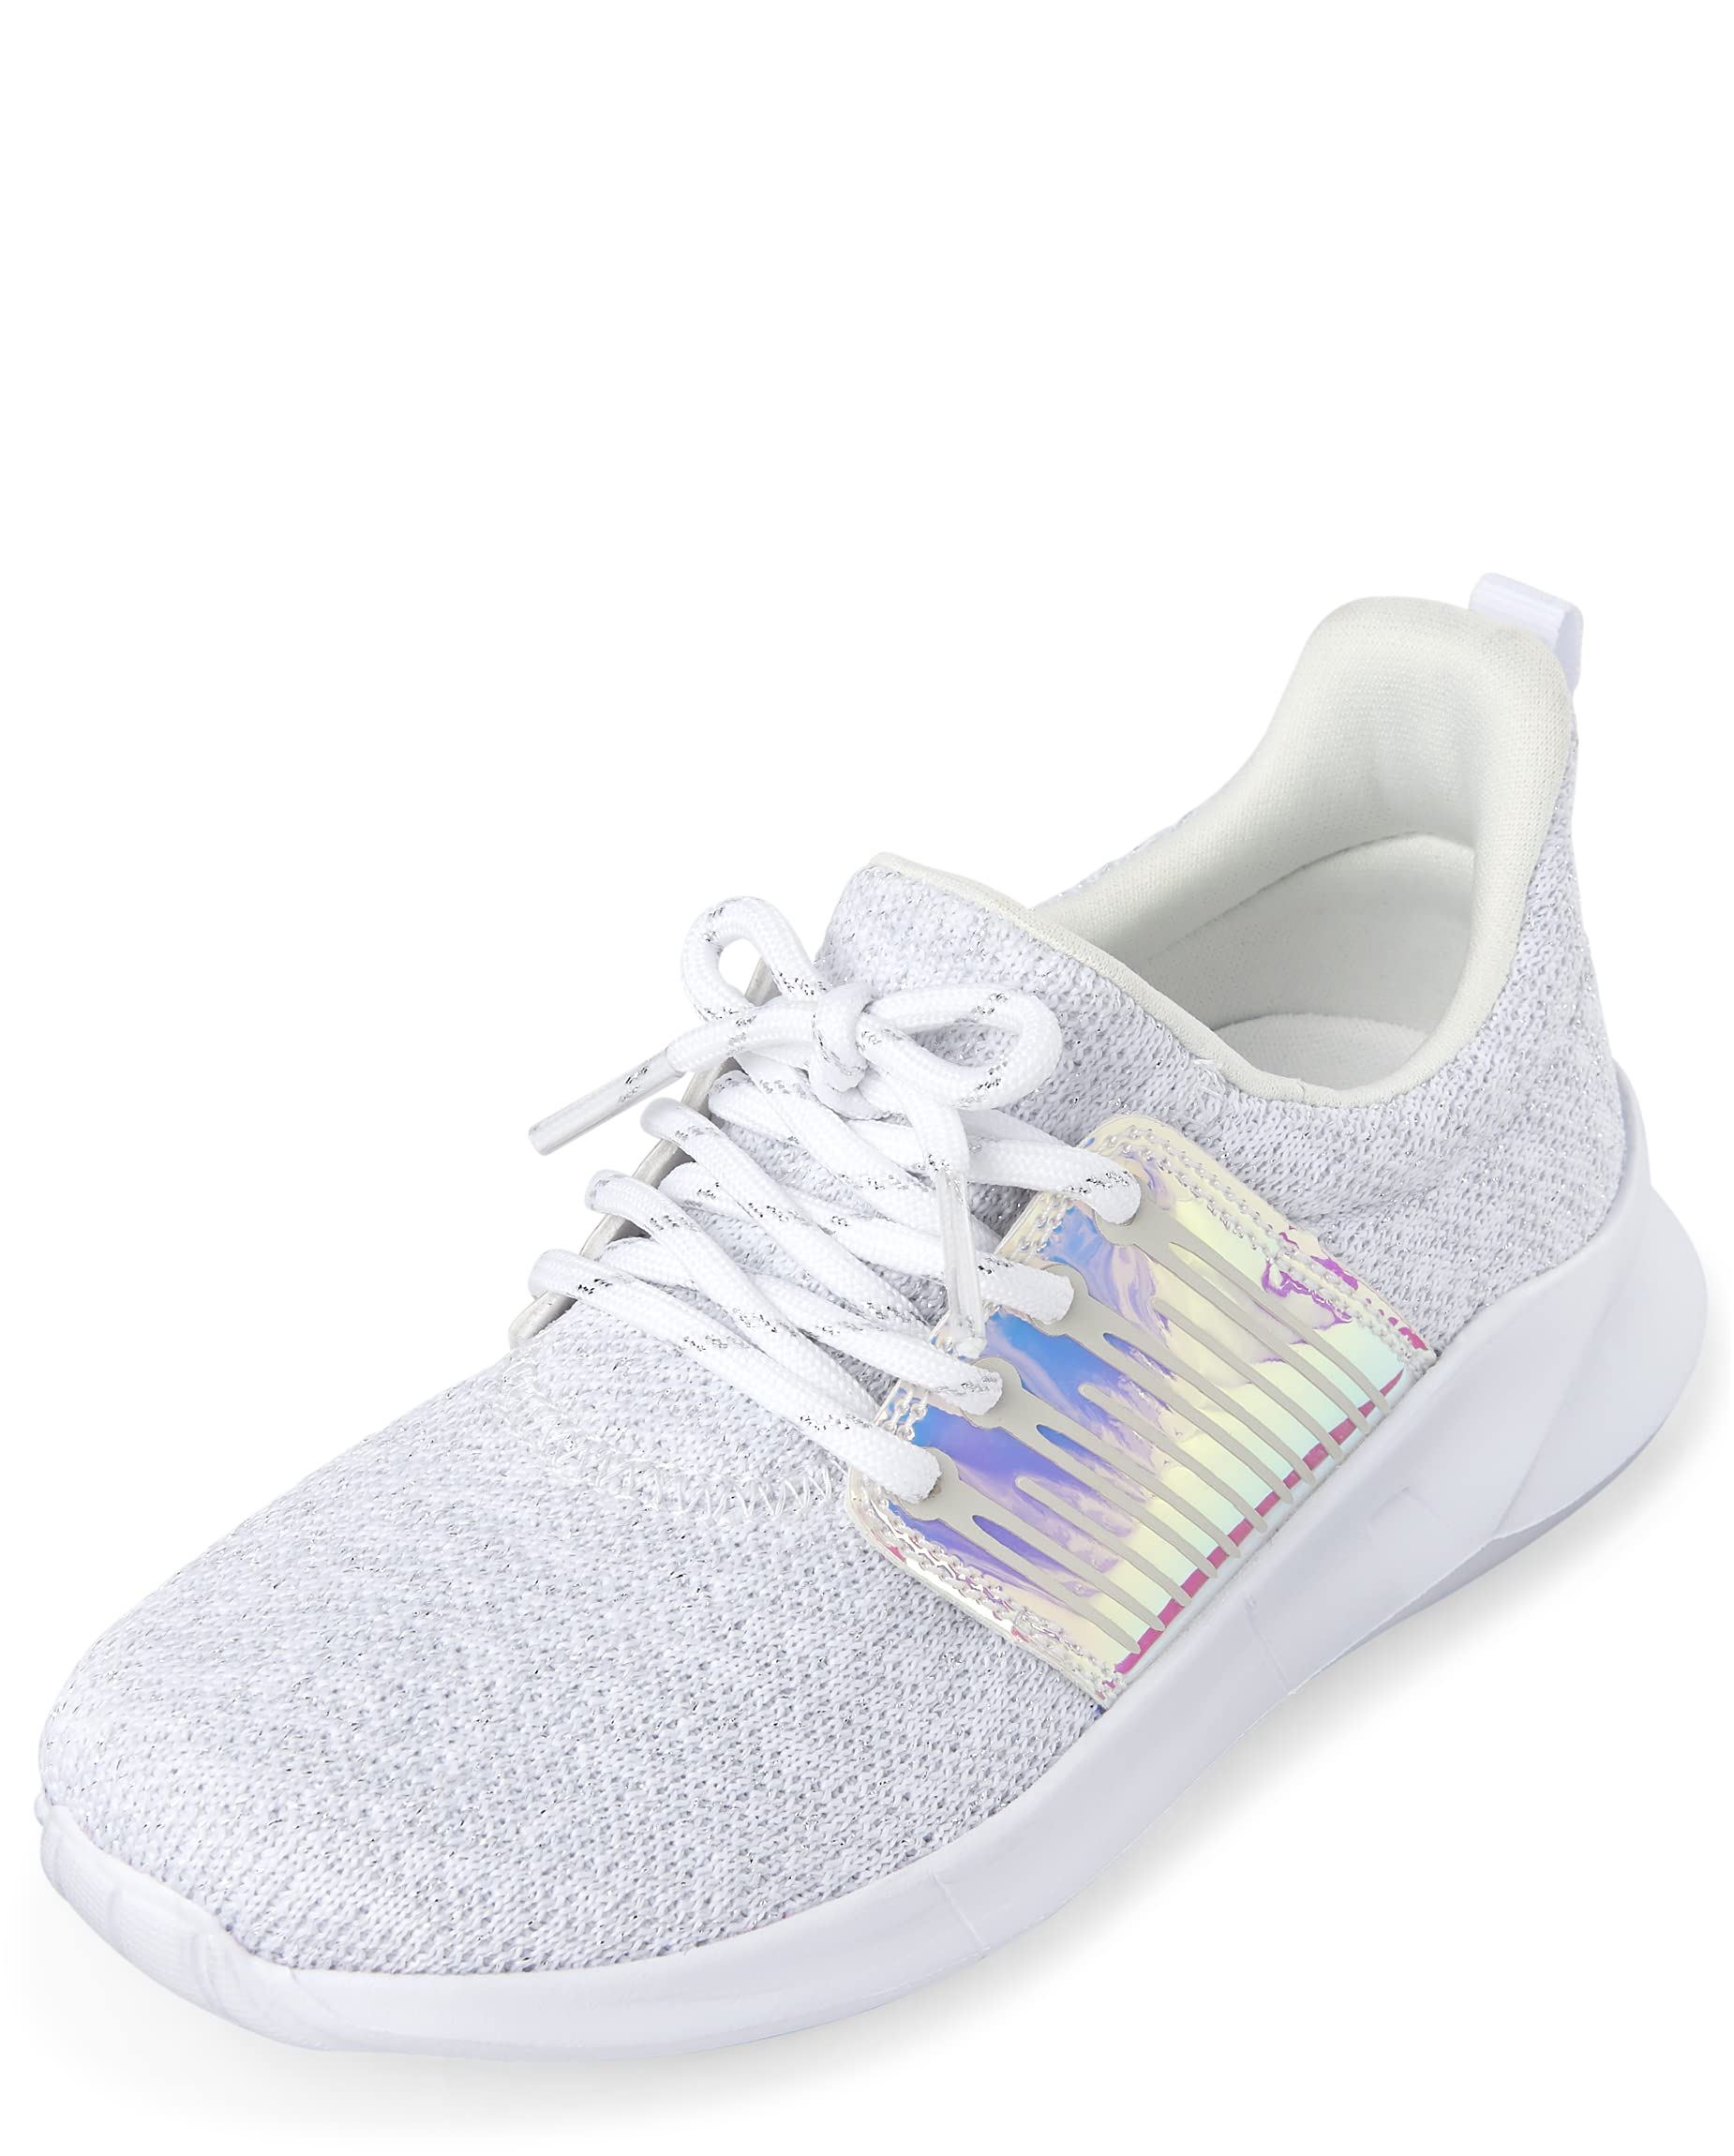 The Children's Place Girls Casual Lace Up Running Sneakers